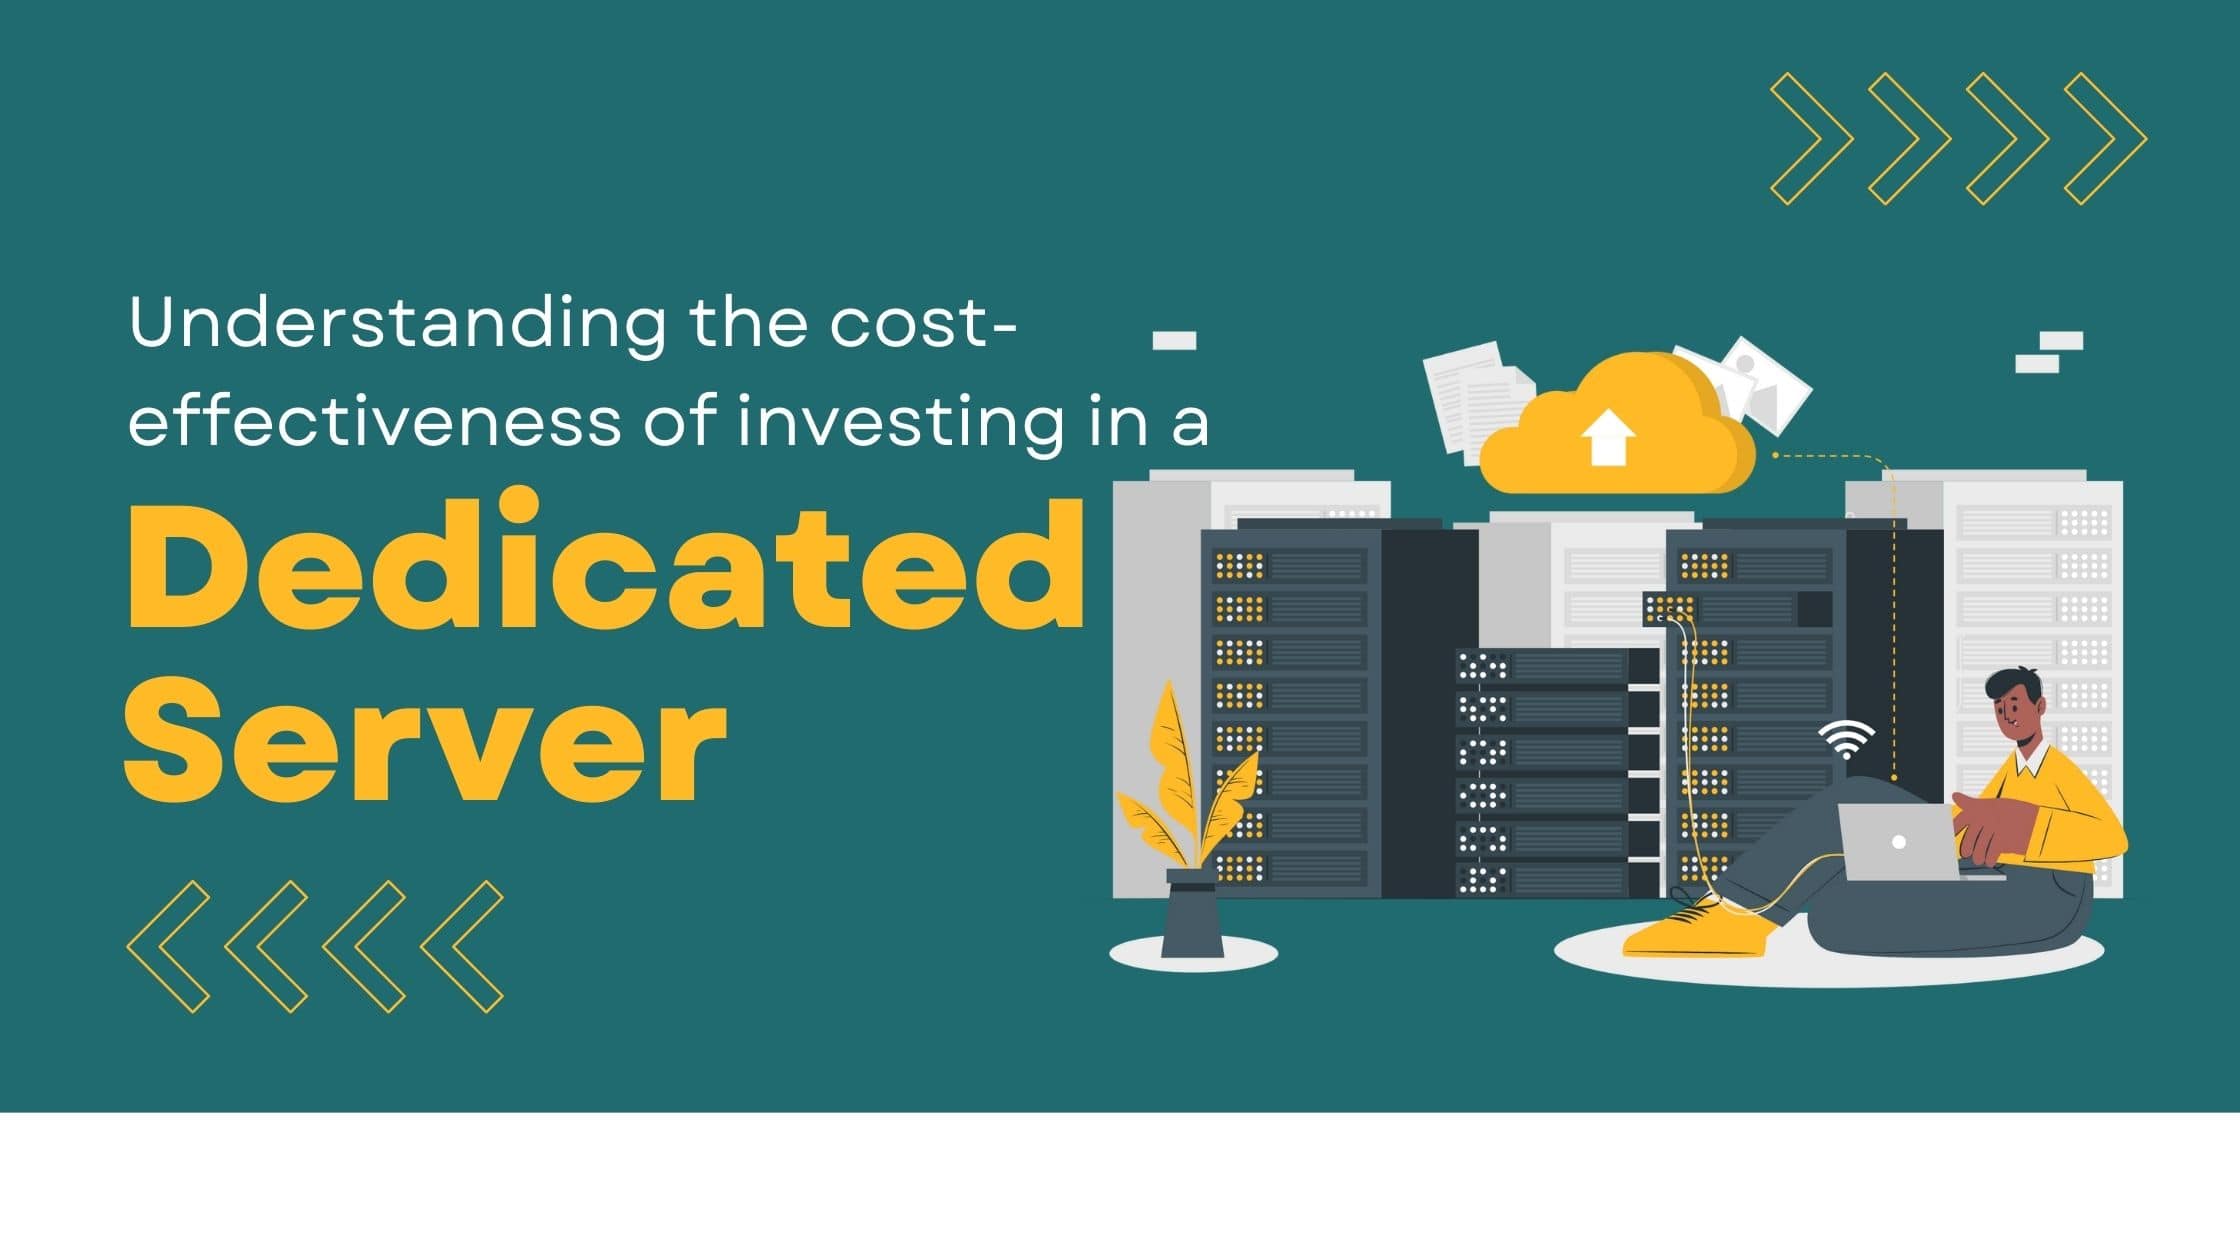 Understanding the cost-effectiveness of investing in a dedicated server